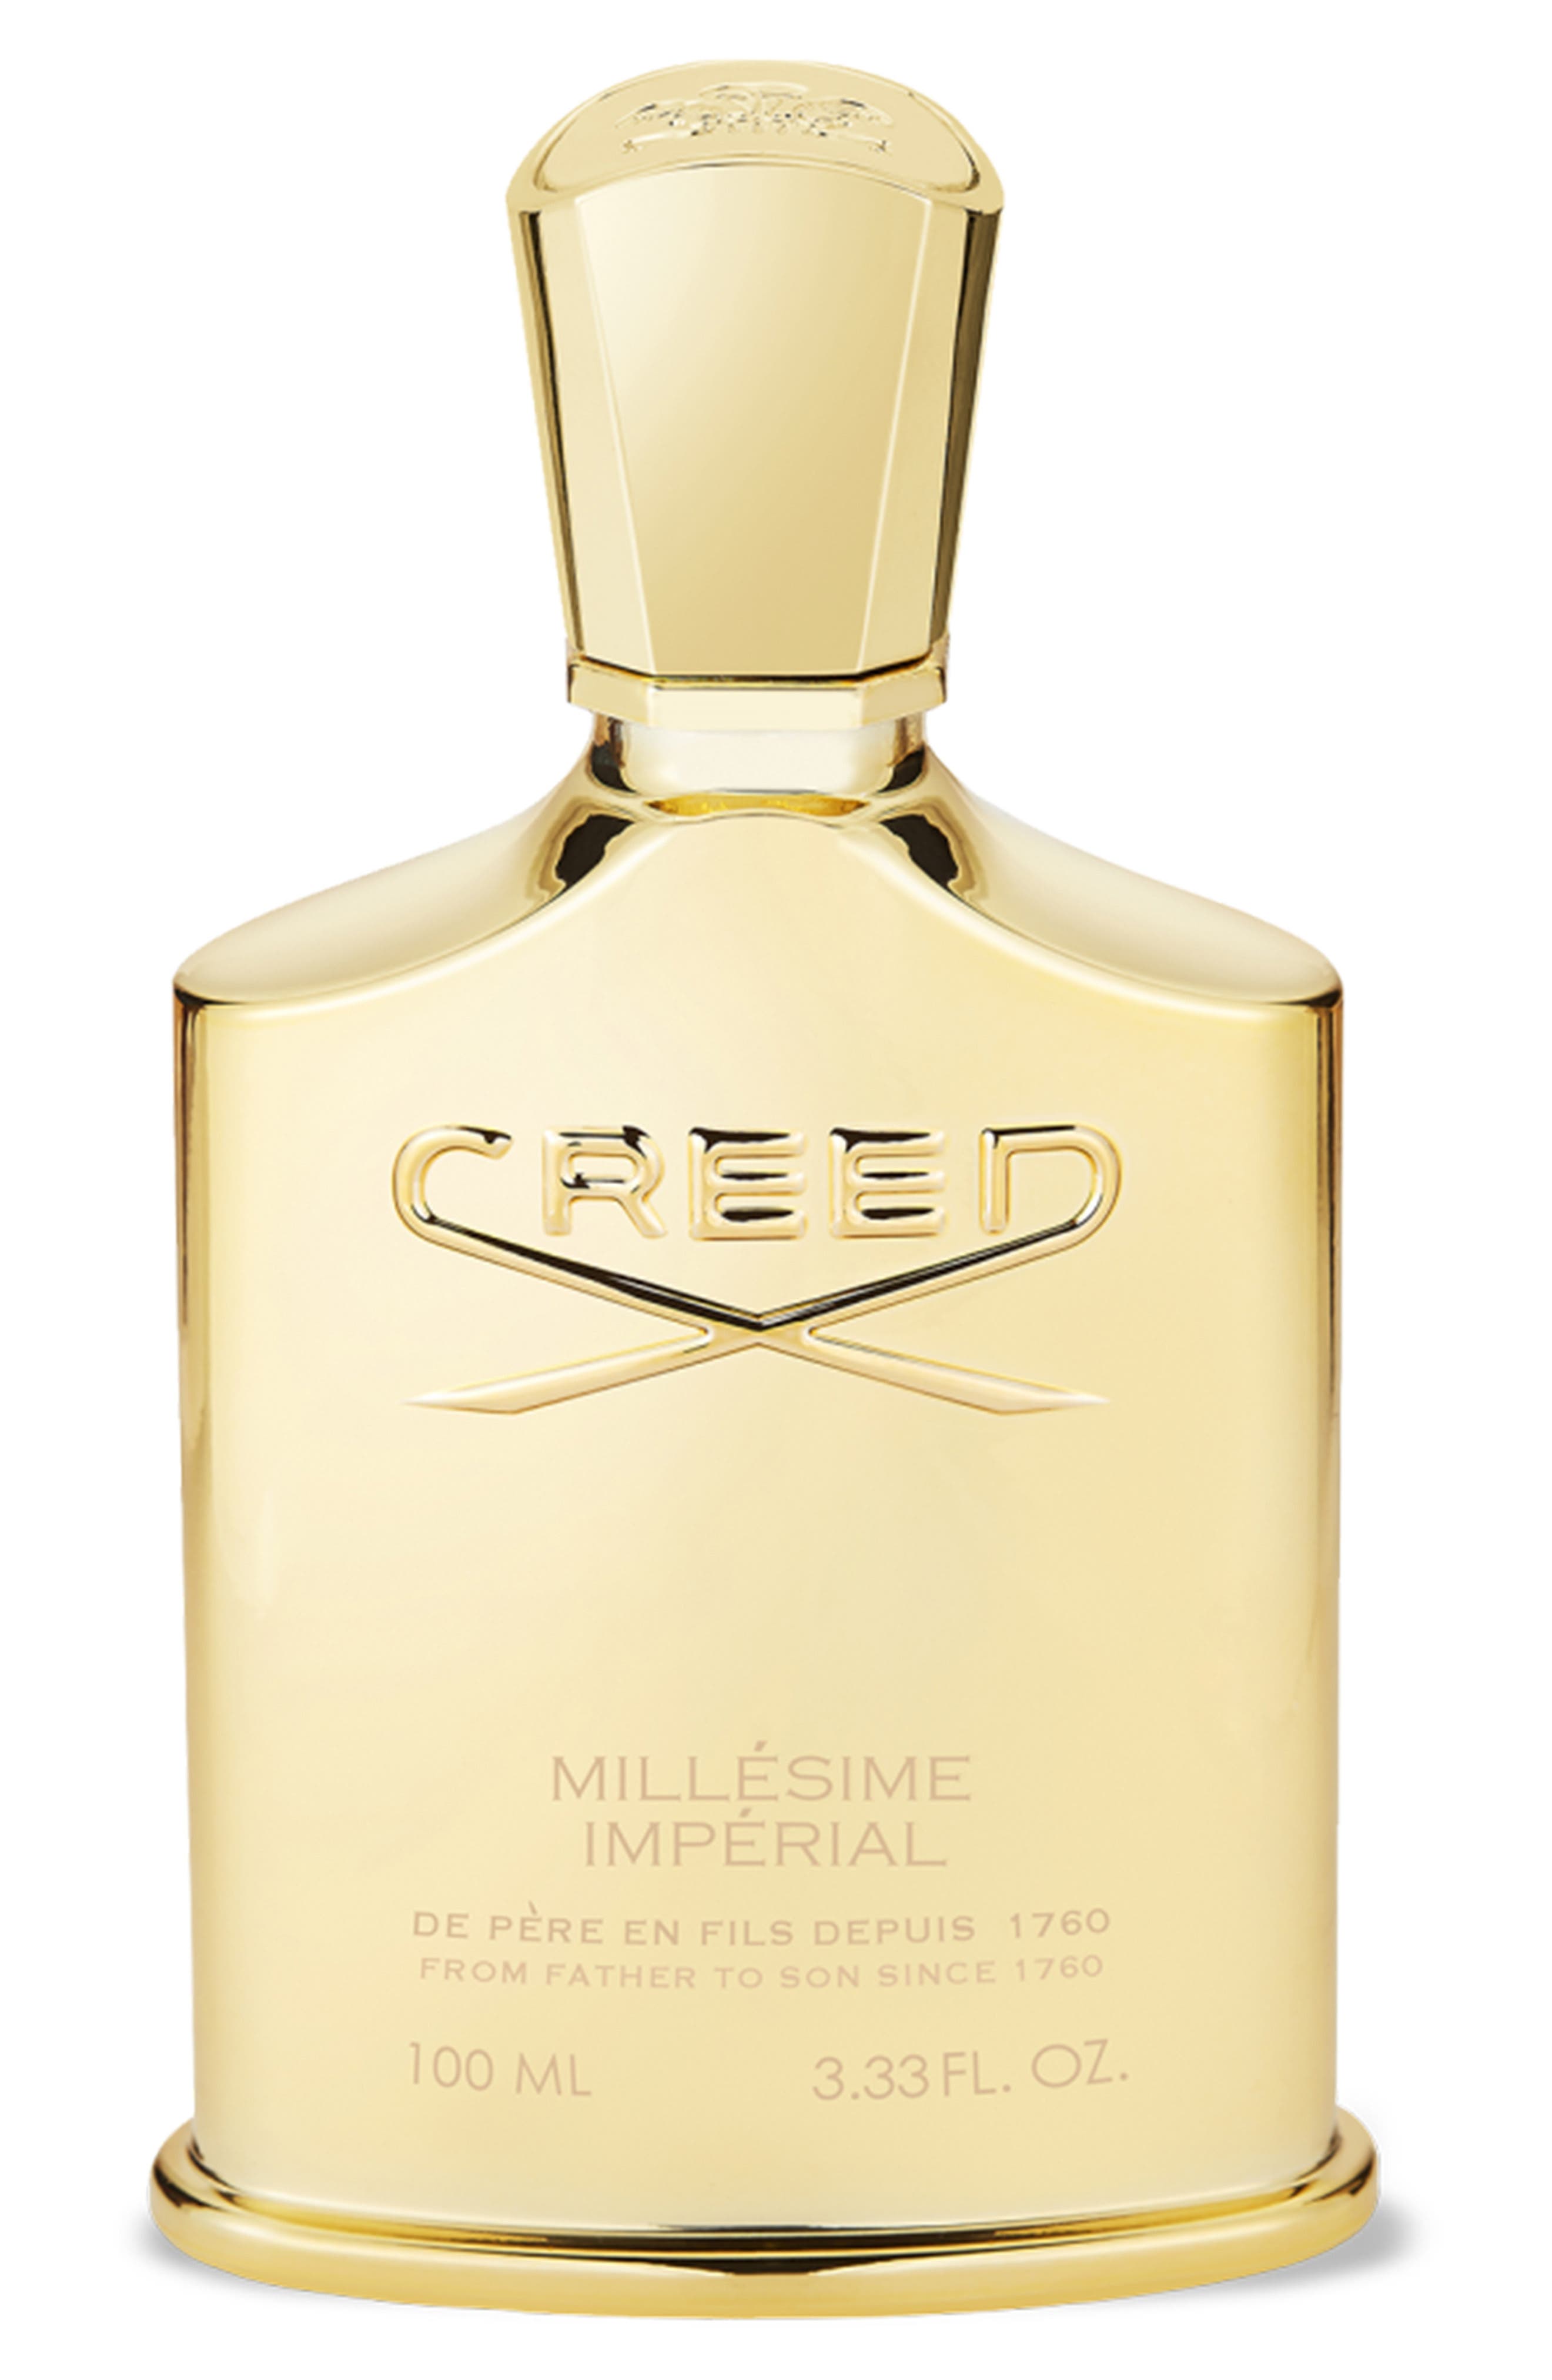 creed fragrance for her